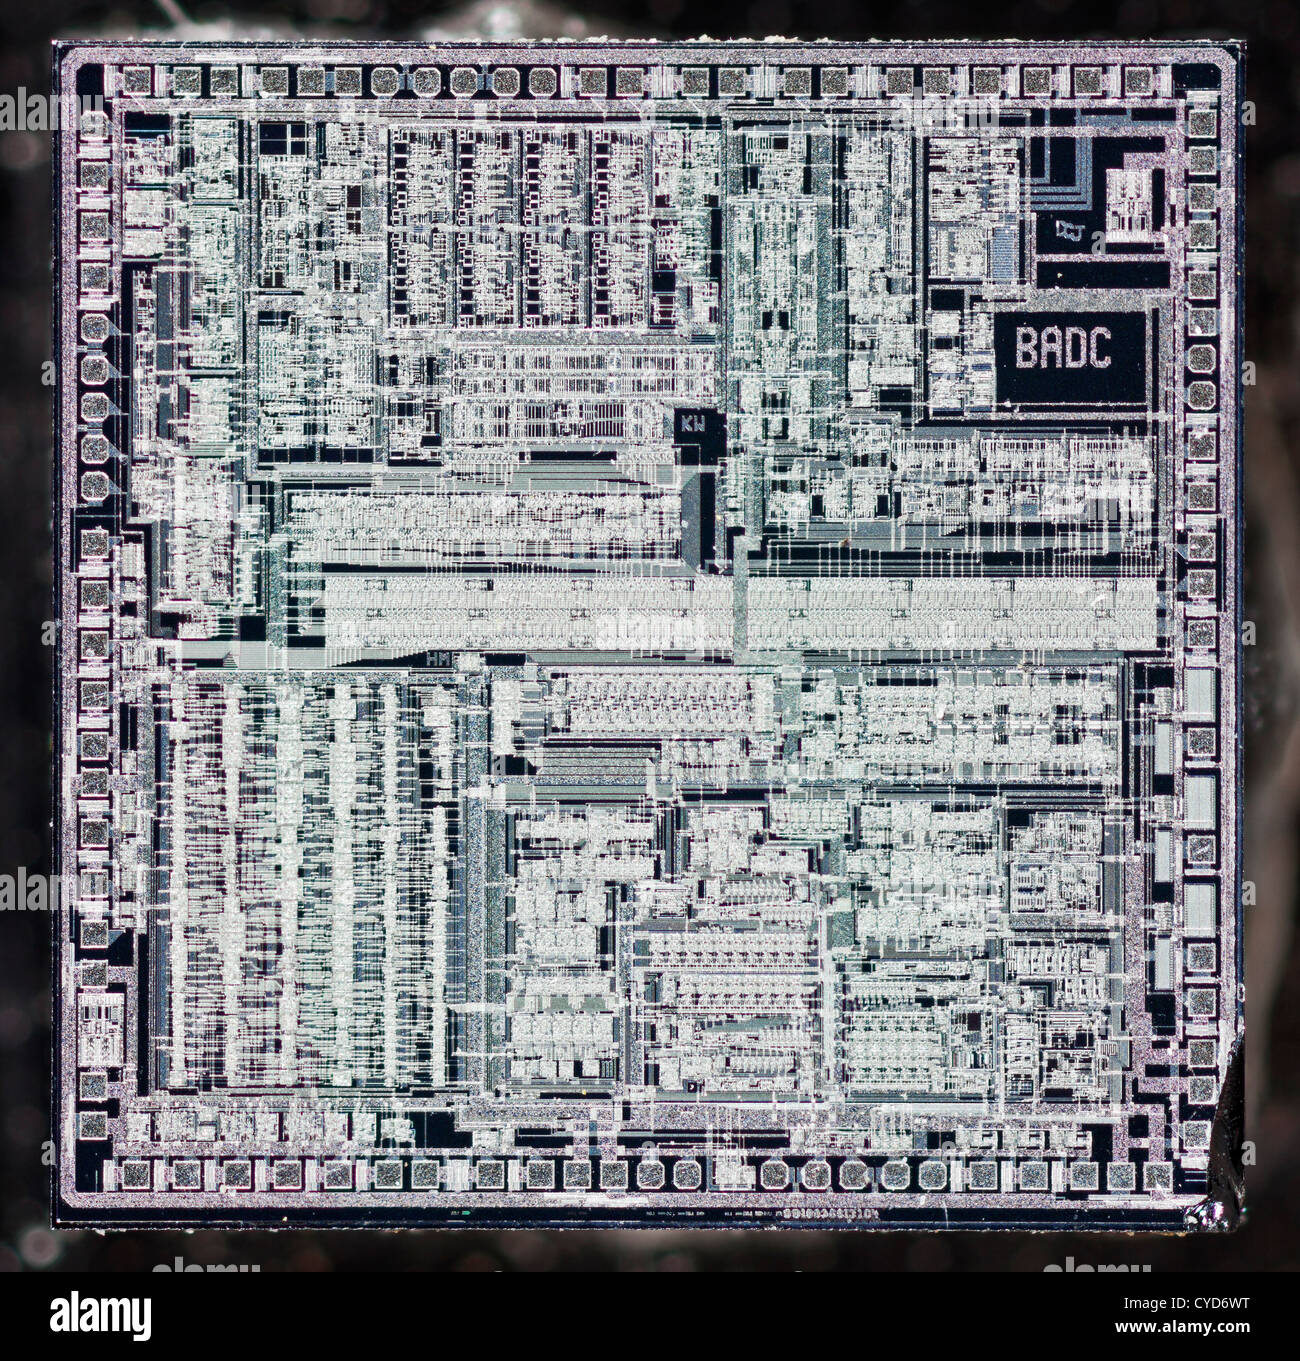 Silicon chip, integrated circuit, from a hard disk drive VLSI DIE around  1995 vintage Stock Photo - Alamy